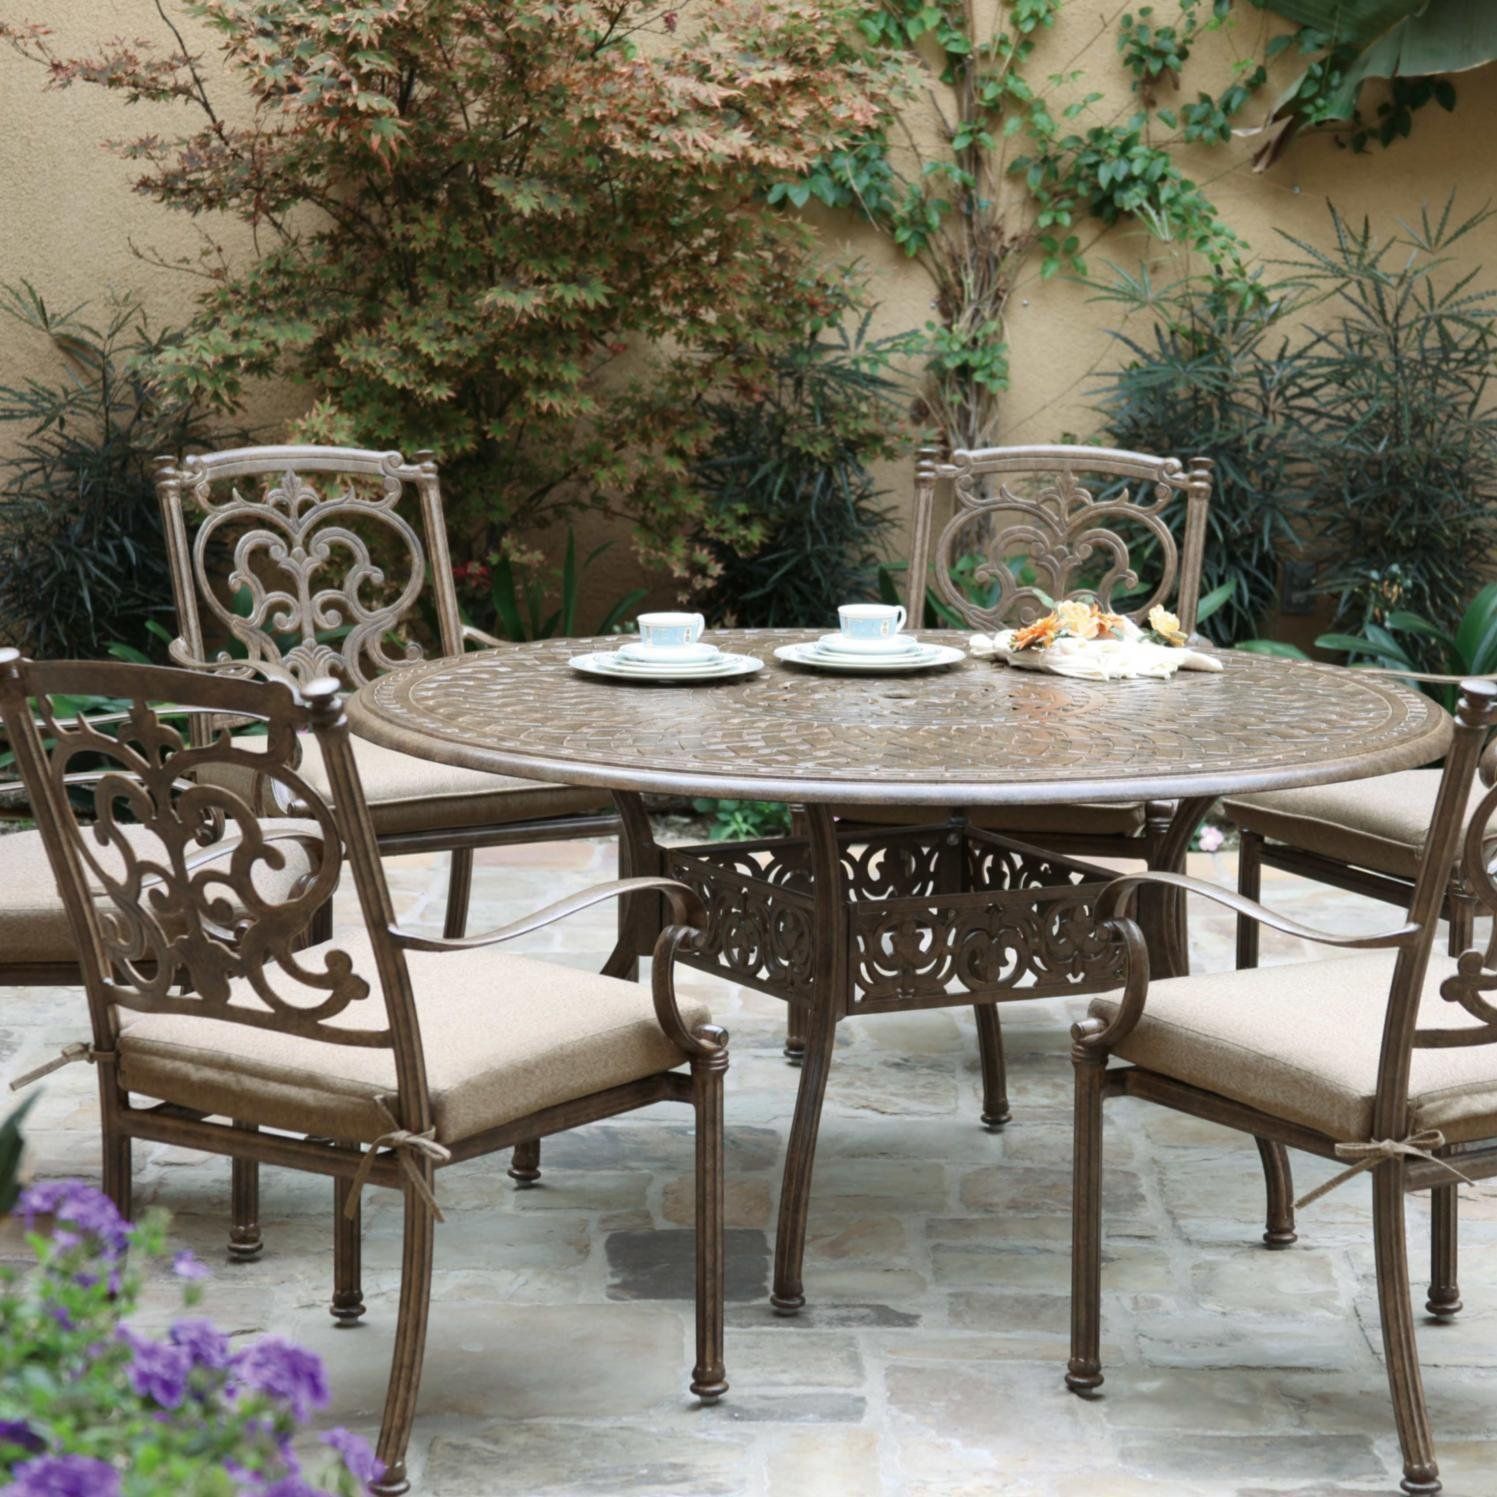 Buy Darlee Santa Barbara 7 Piece Cast Aluminum Patio Dining Set With Throughout Extendable 7 Piece Patio Dining Sets (View 6 of 15)